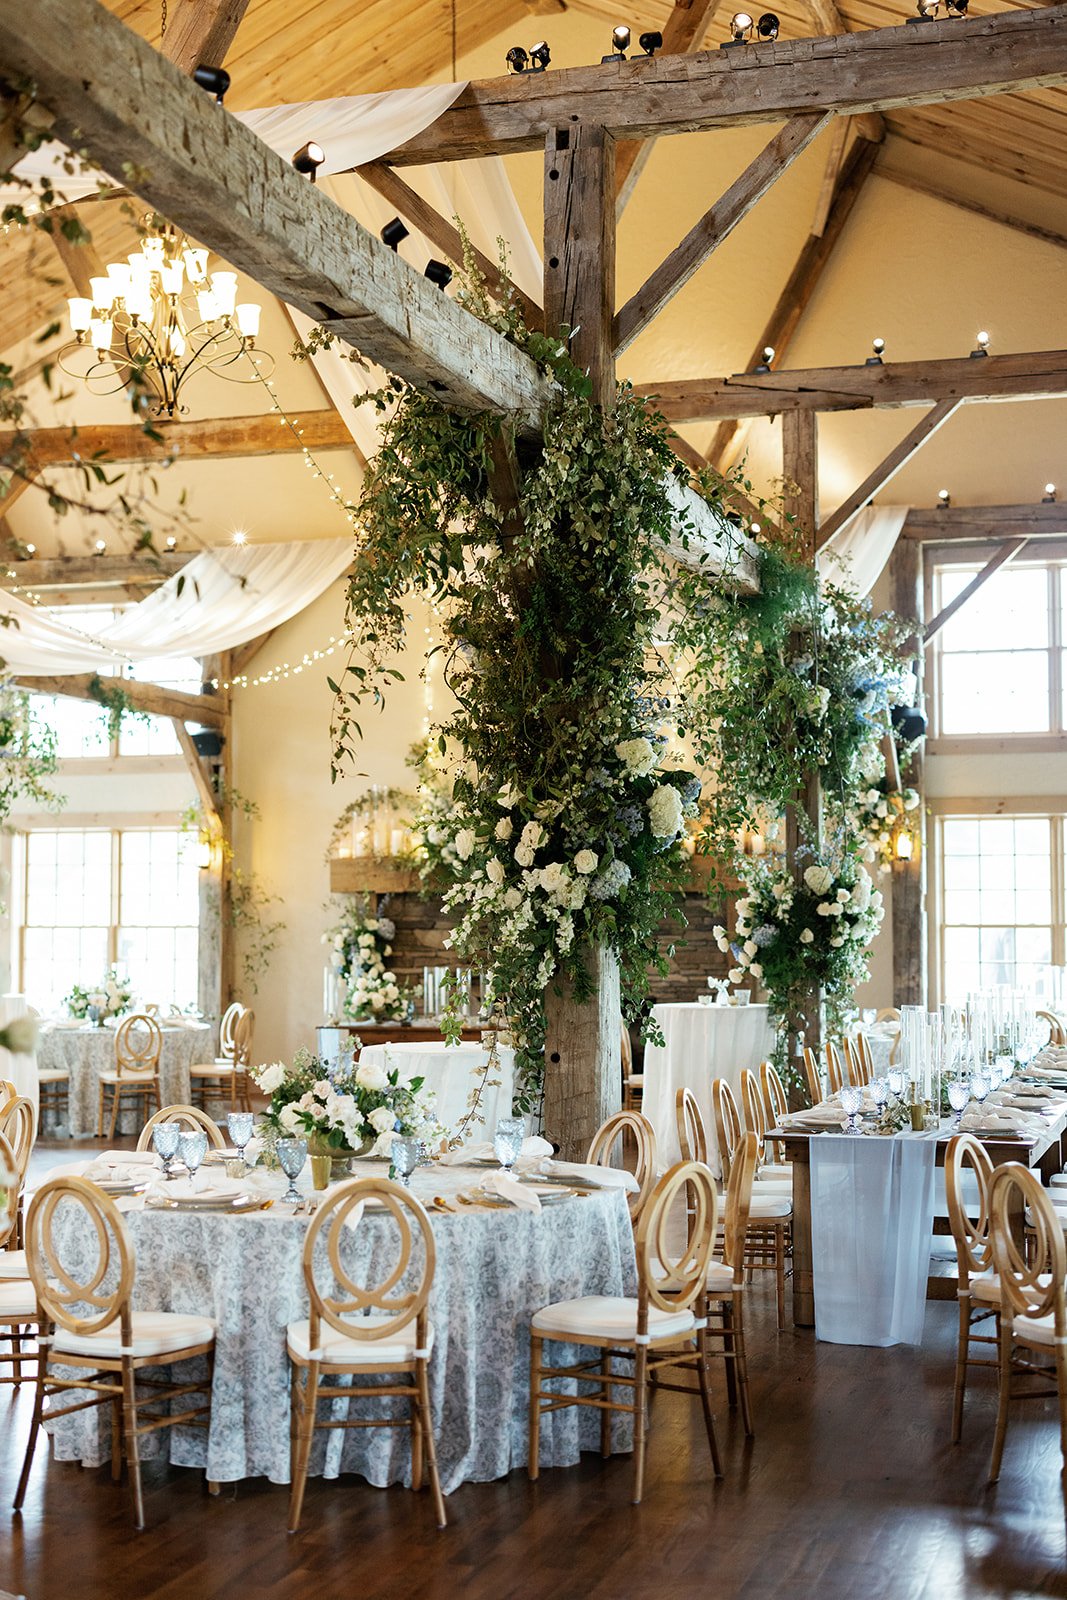 A wedding venue with wooden beams adorned with greenery and tables with blue and white linens. 